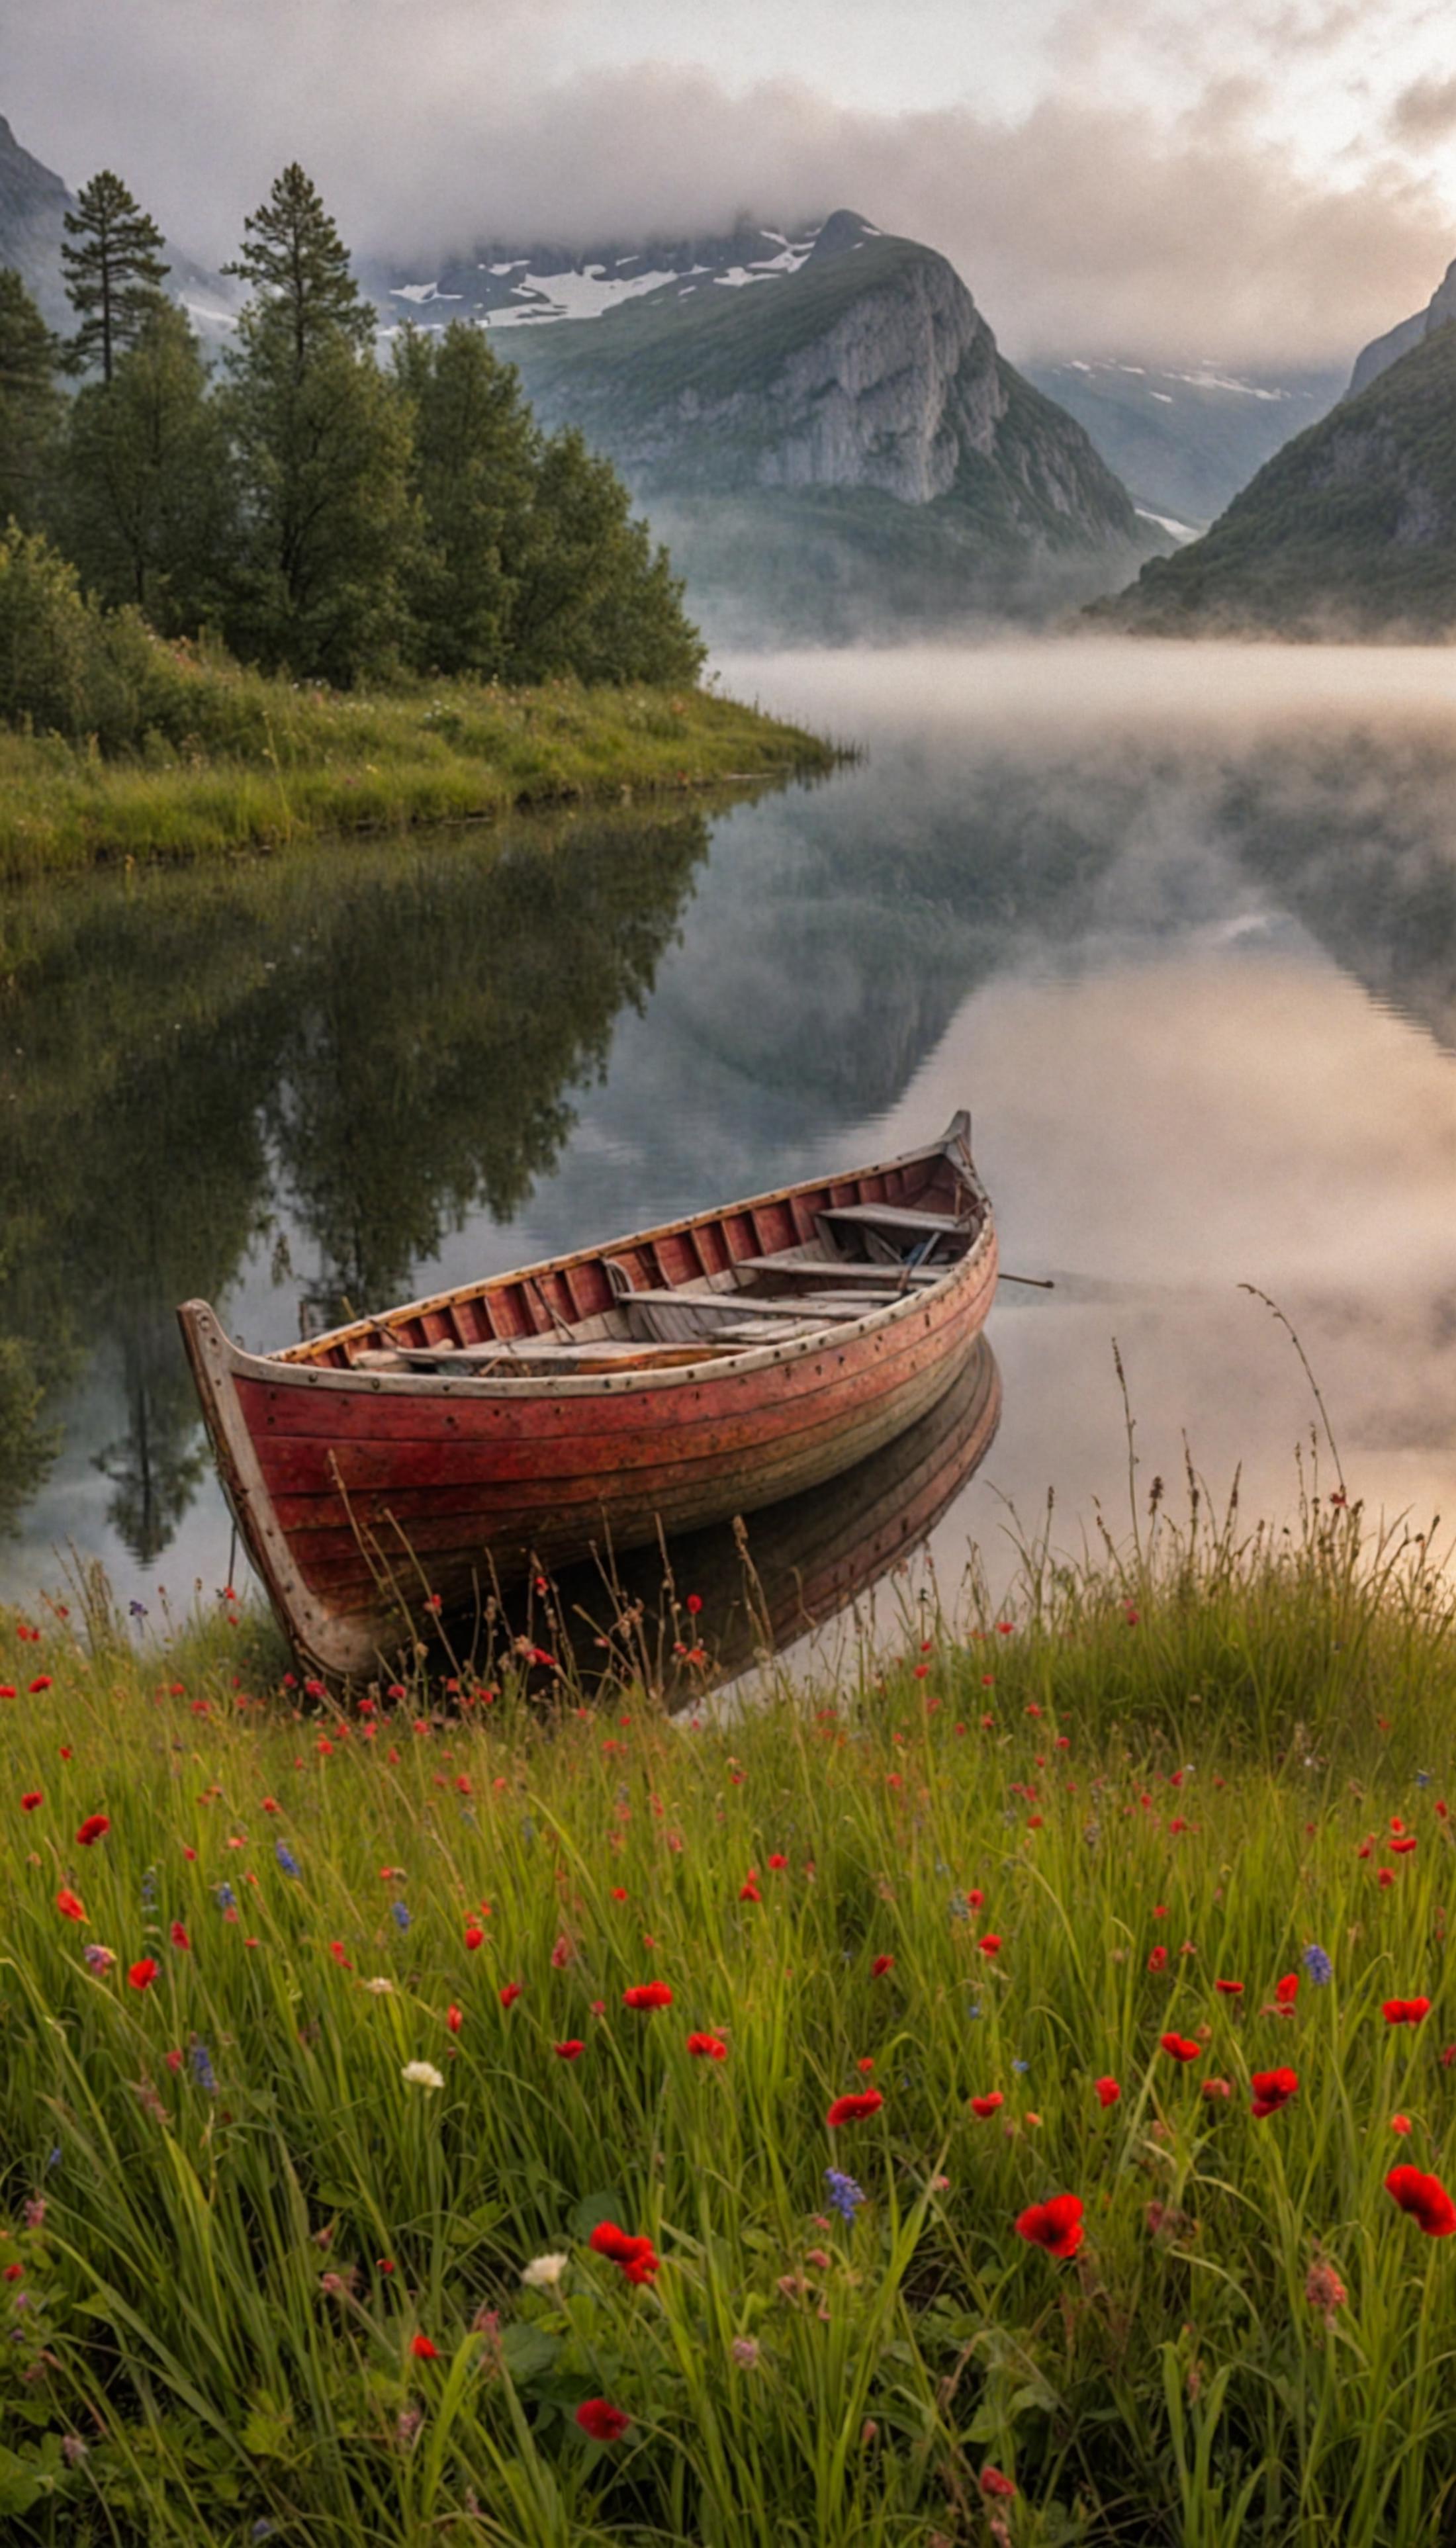 A red boat on a lake with mountains in the background.